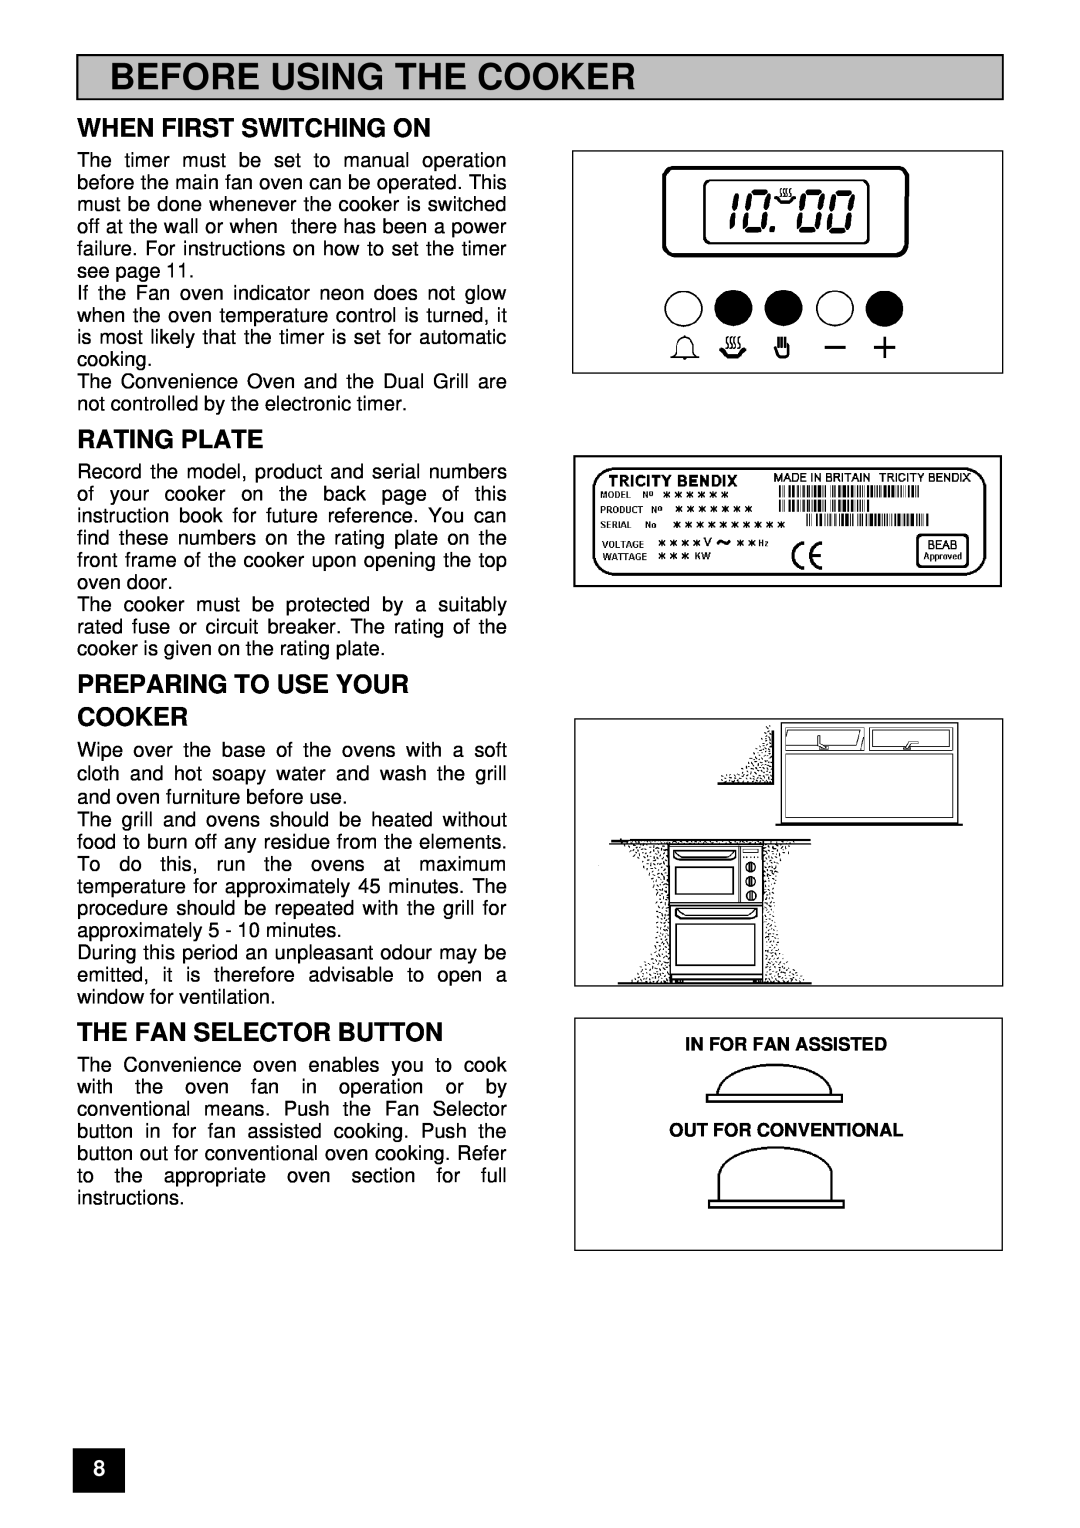 Tricity Bendix E 750 Before Using The Cooker, When First Switching On, Rating Plate, Preparing To Use Your Cooker 